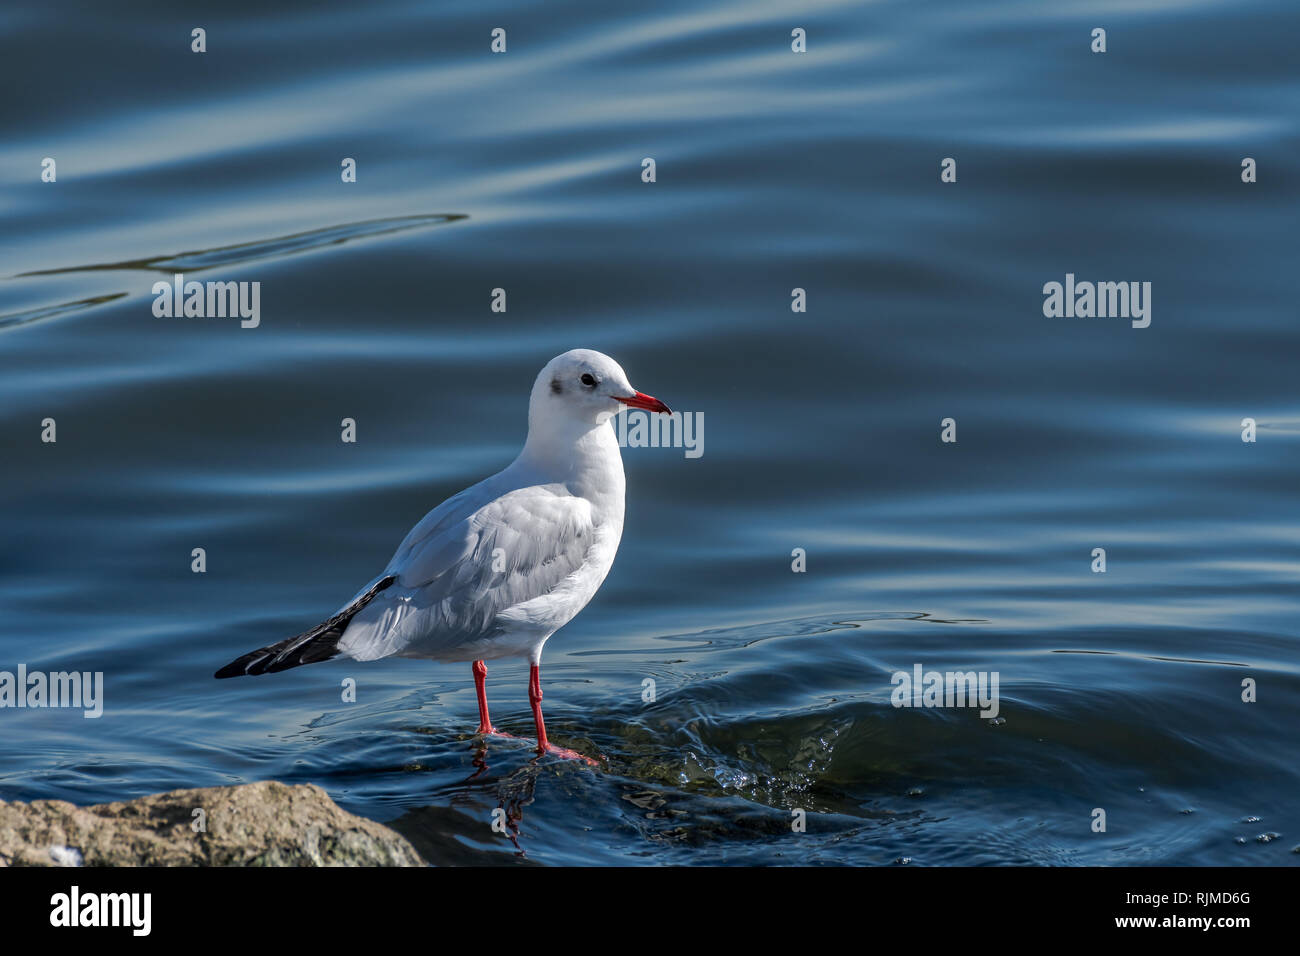 Black-headed Gull [Larus ridibundus], adult winter plumage, commonly spotted in Pohang, South Korea Stock Photo